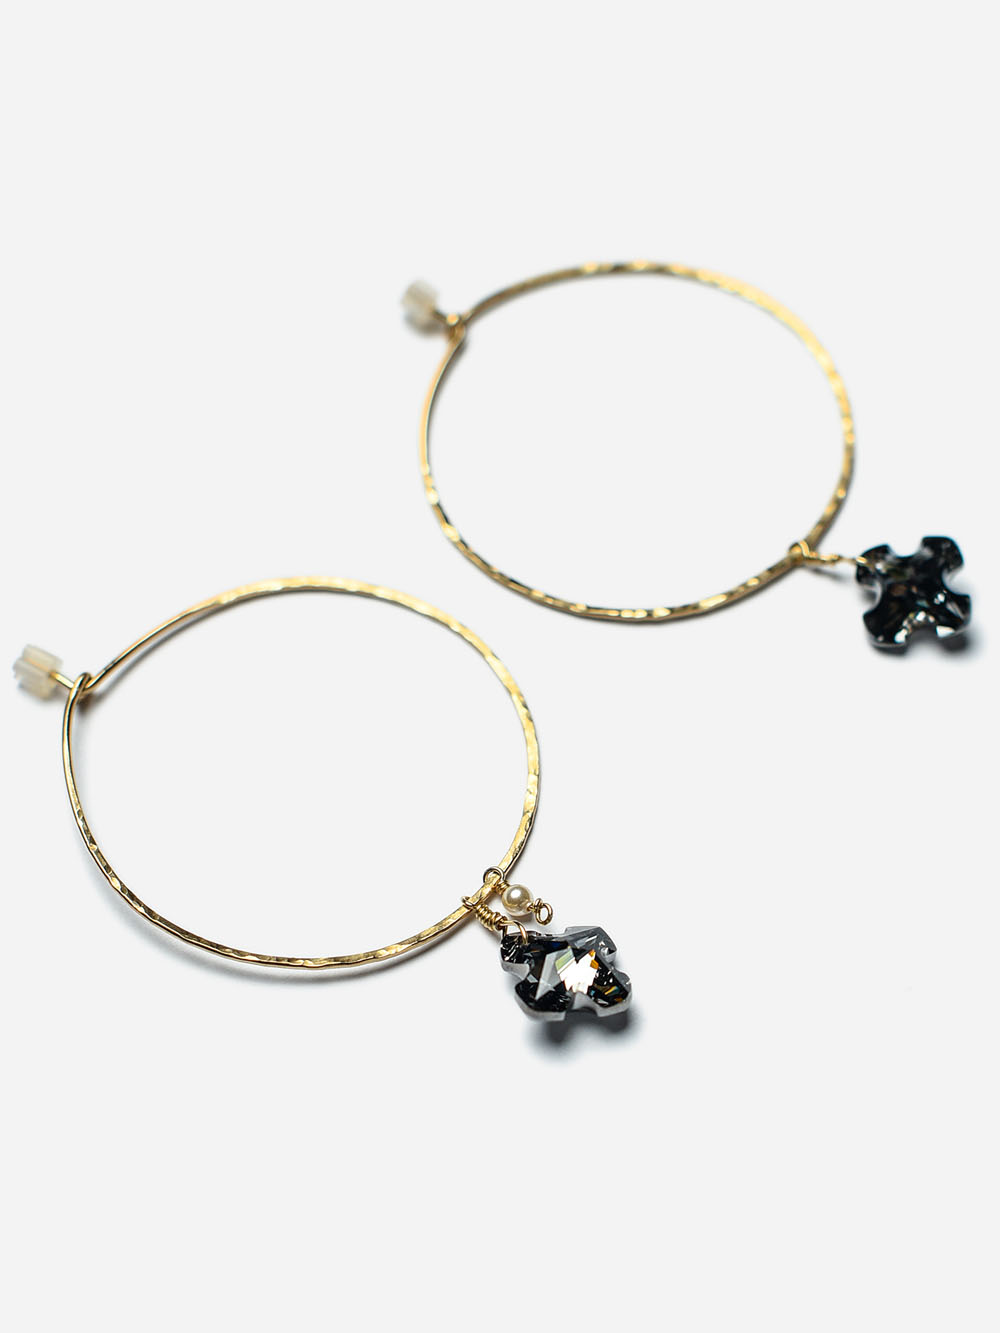 14k gold filled hoop earrings with black cross crystals and white pearls